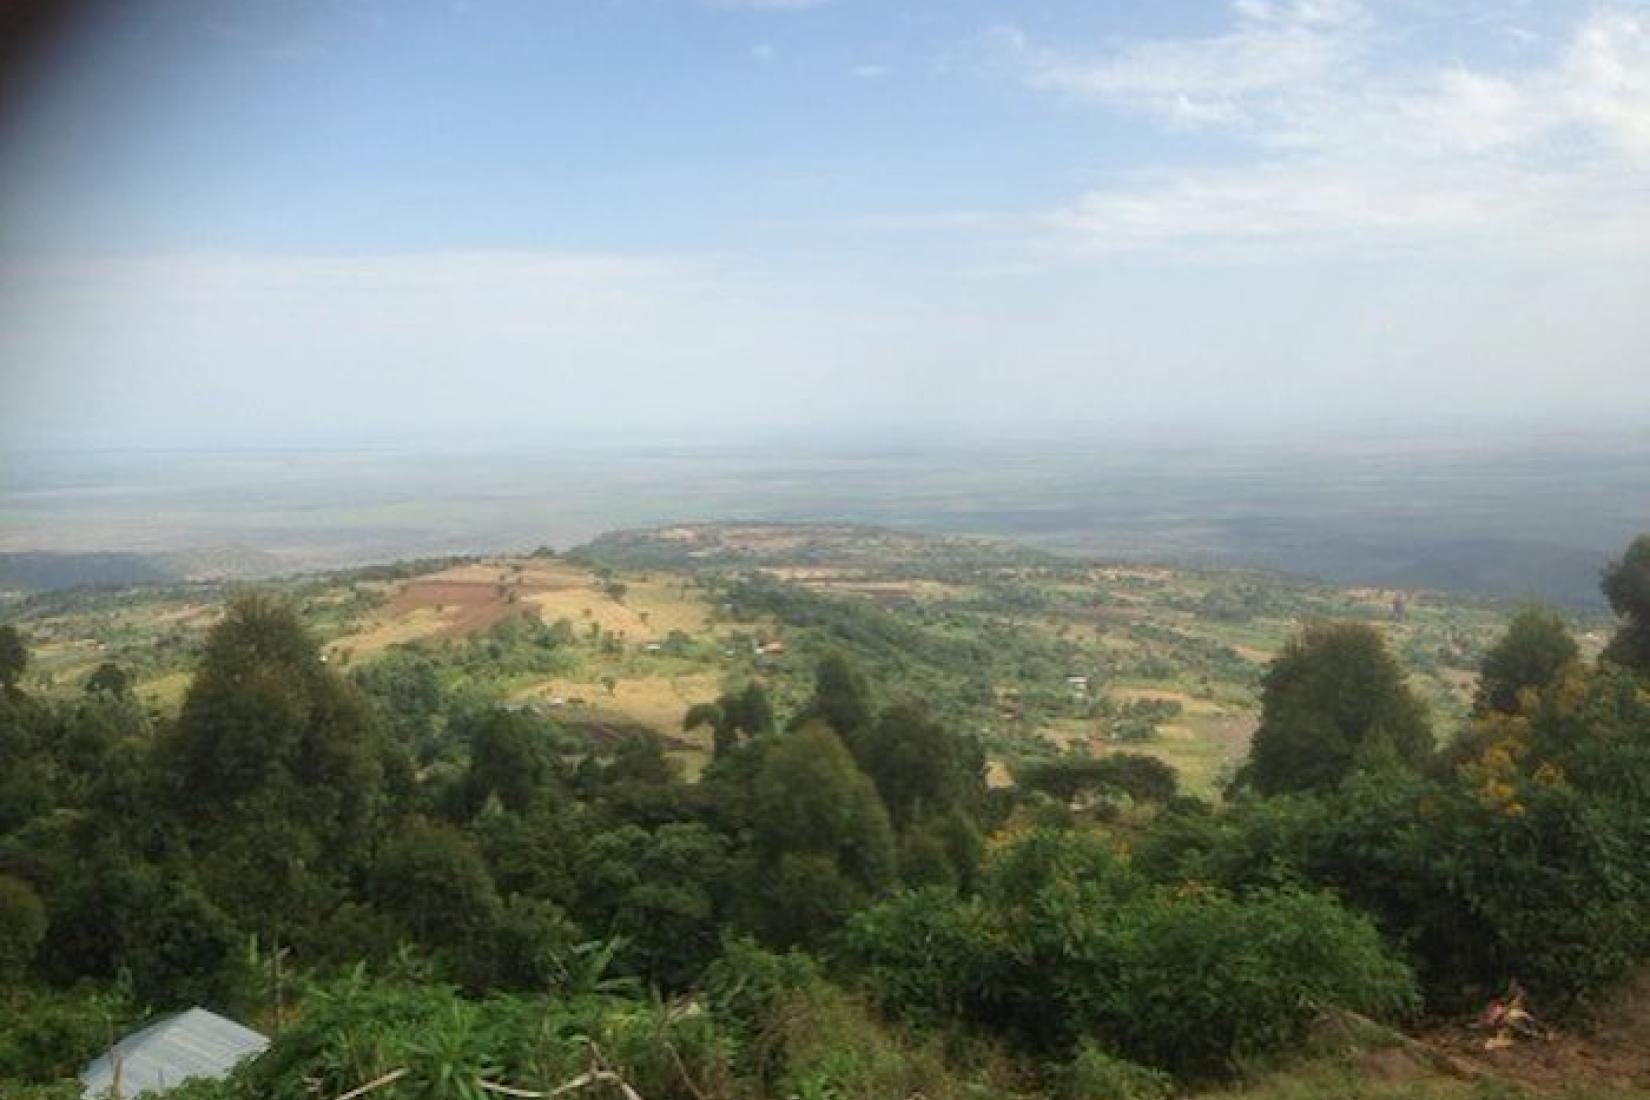 Views of the intensively farms slopes of Mt Elgon below Kapchorwa - a tropical highland region of intensive agriculture. Image: Jason Alexandra